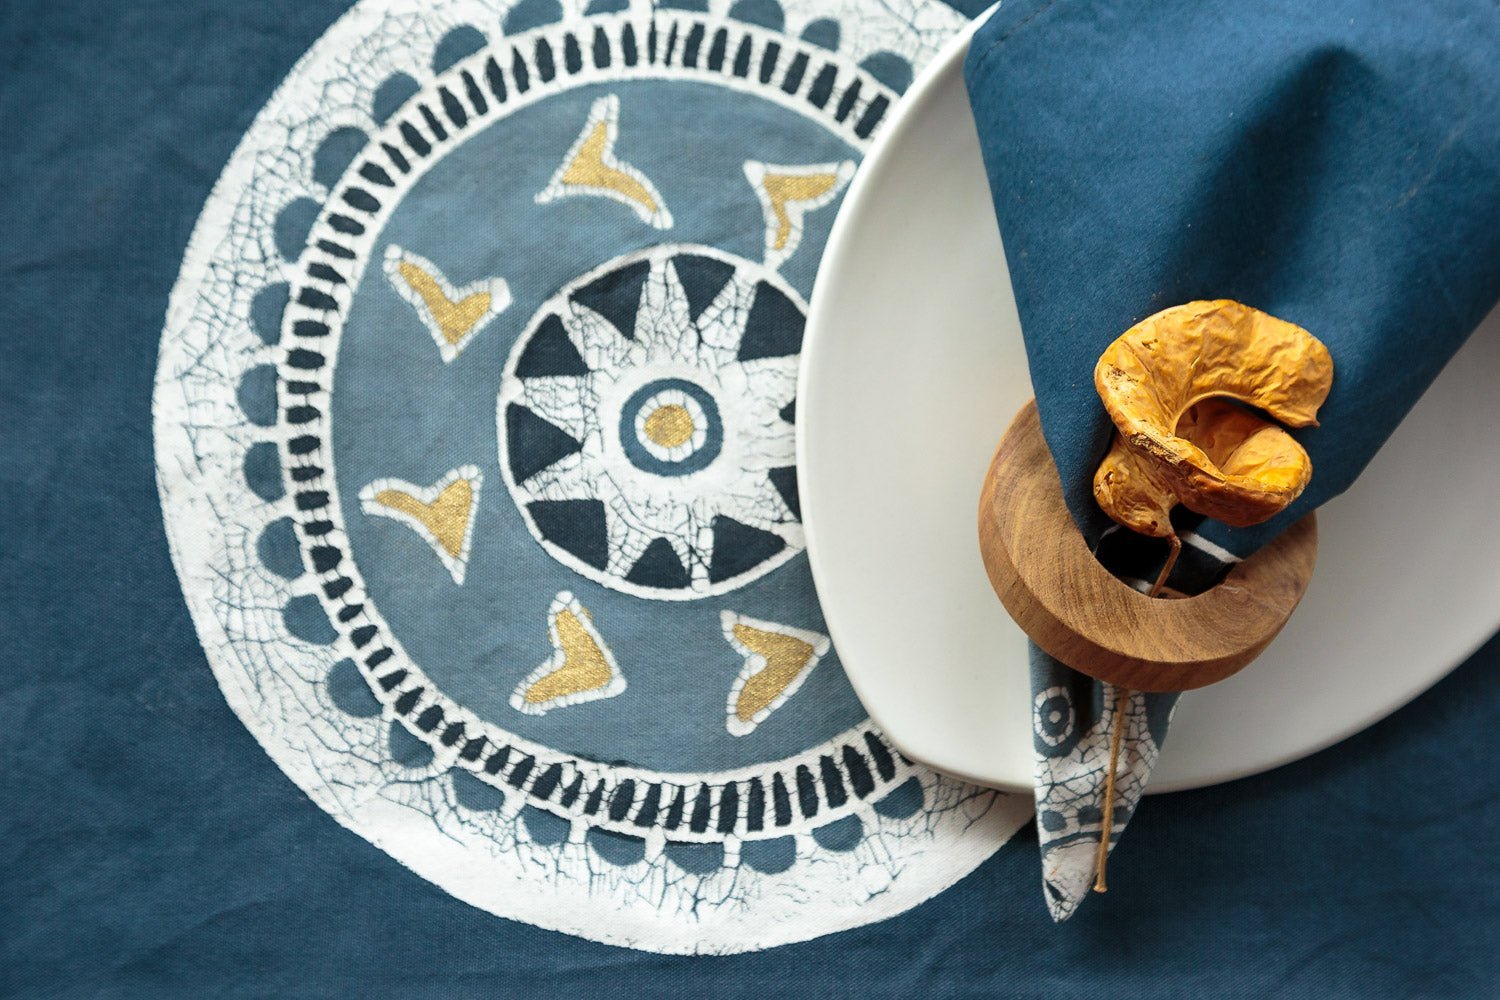 The perfect elegant blue napkins adorned with a chic circular pattern, teal and gold accents, inspired by African beauty.